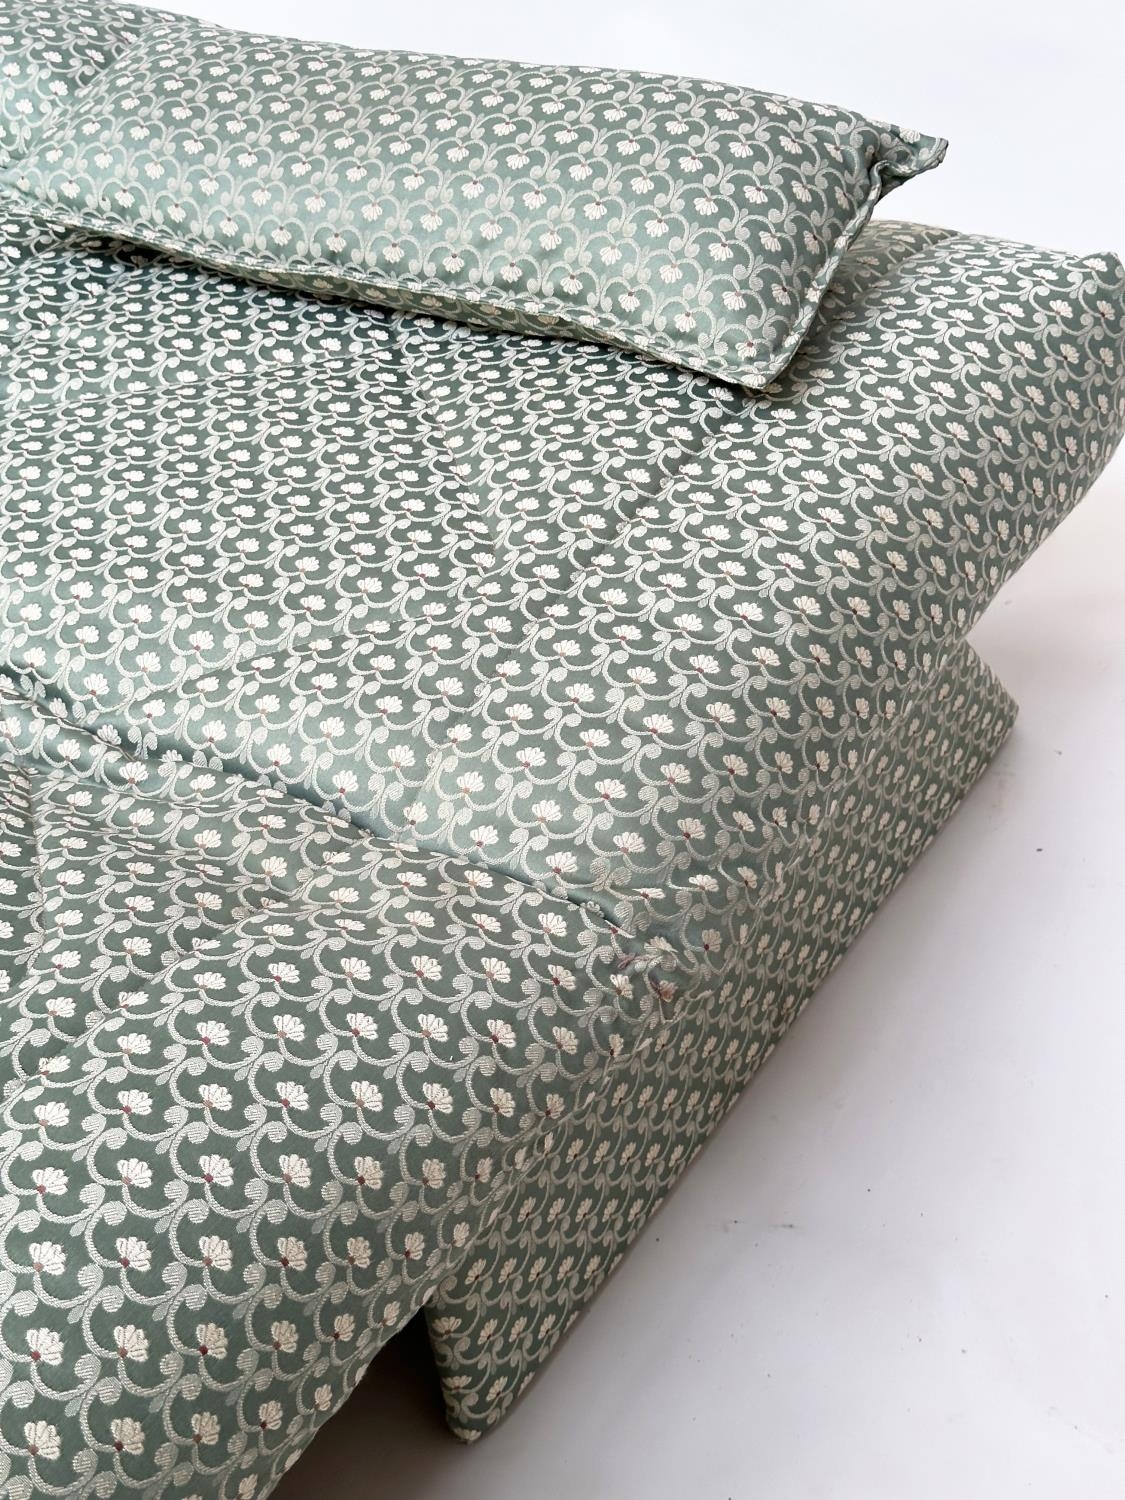 SOFA BED, geometric print upholstered with cushion, transferring to bed, 142cm W (180cm extended). - Image 8 of 8